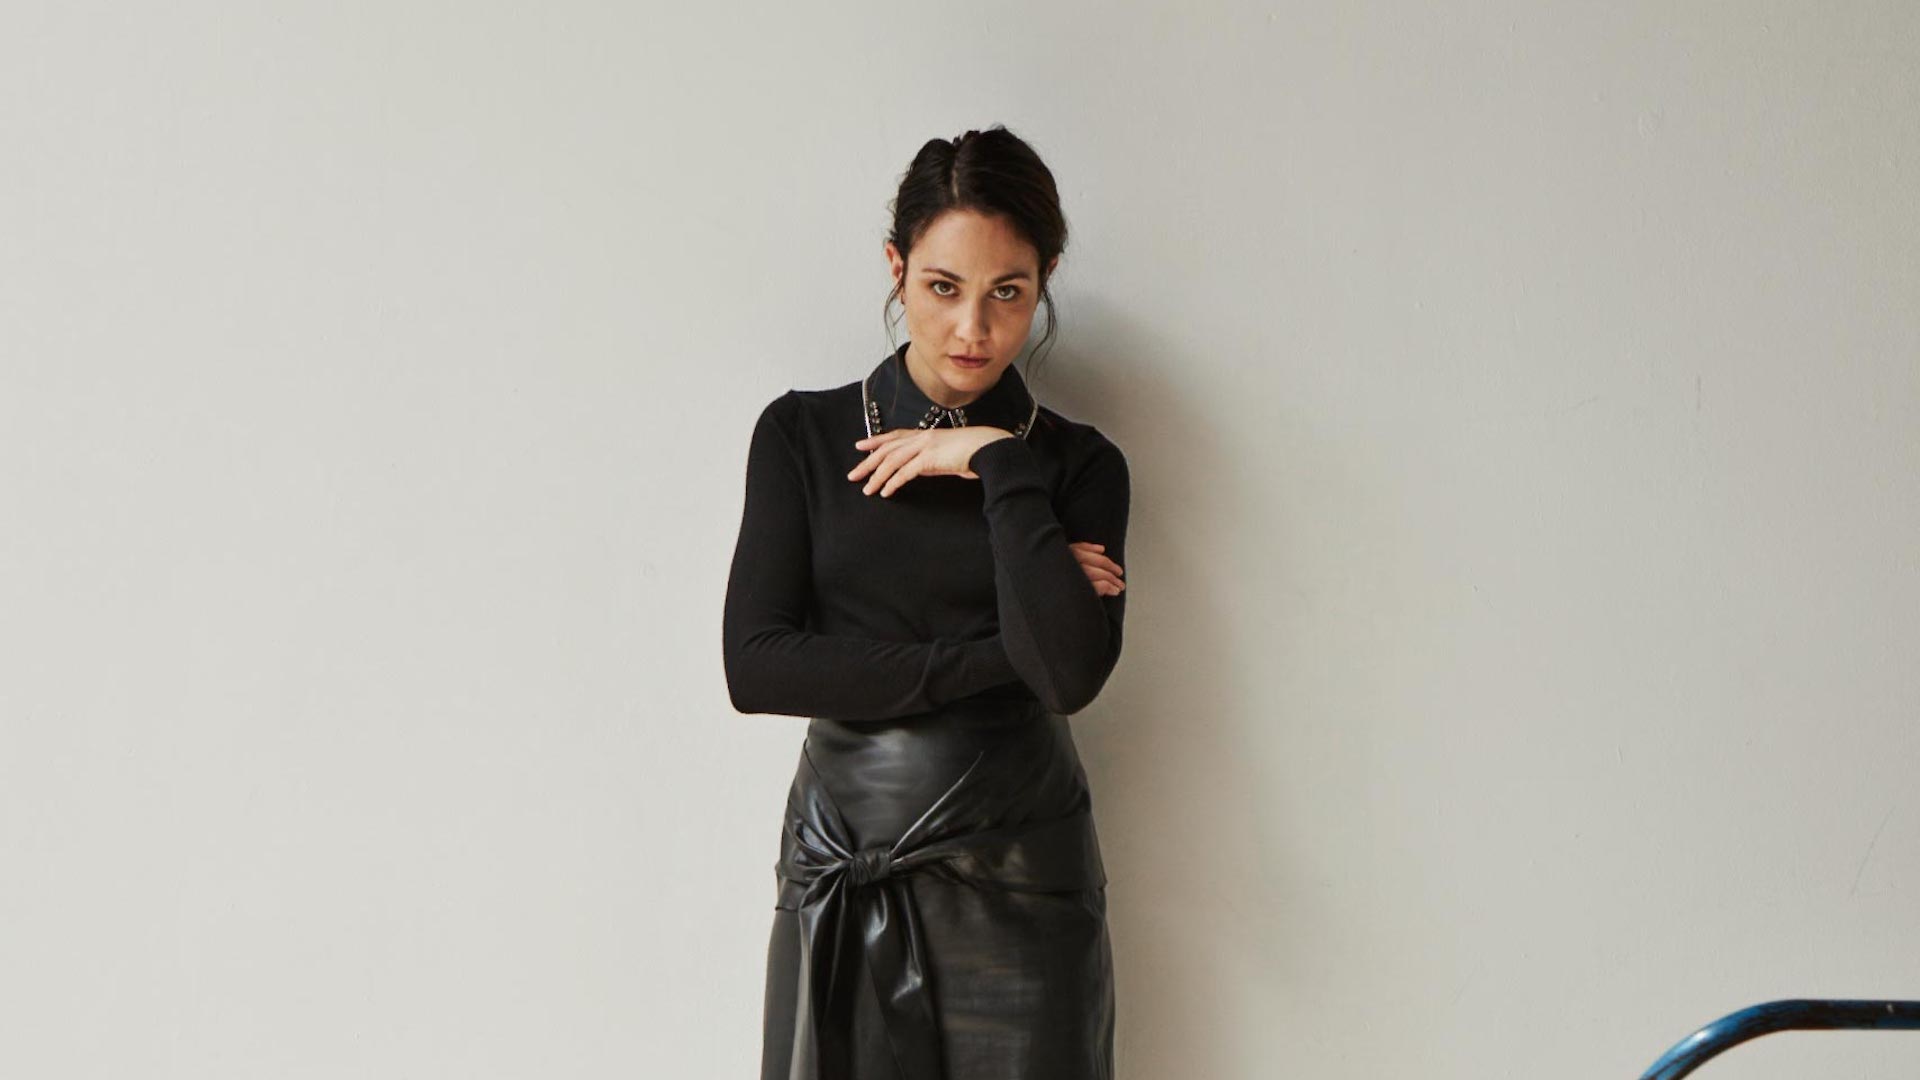 Tuppence Middleton stands wearing all black against a white background